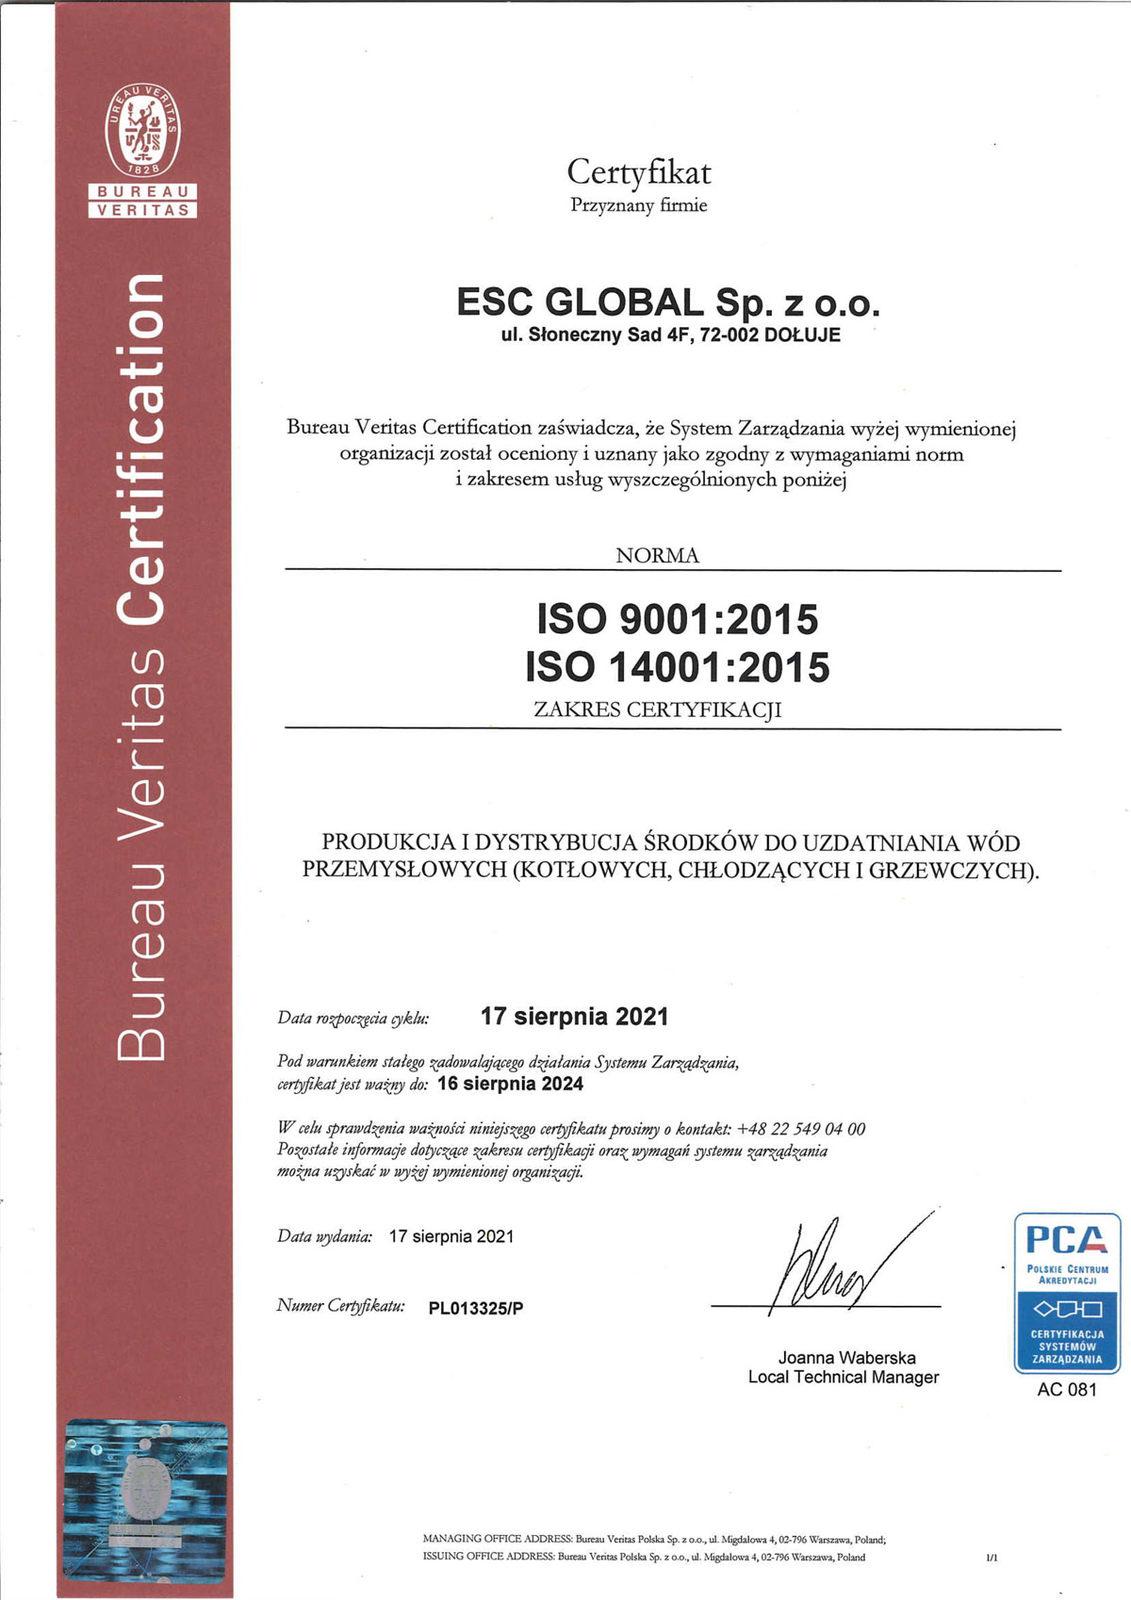 ISO9001-2